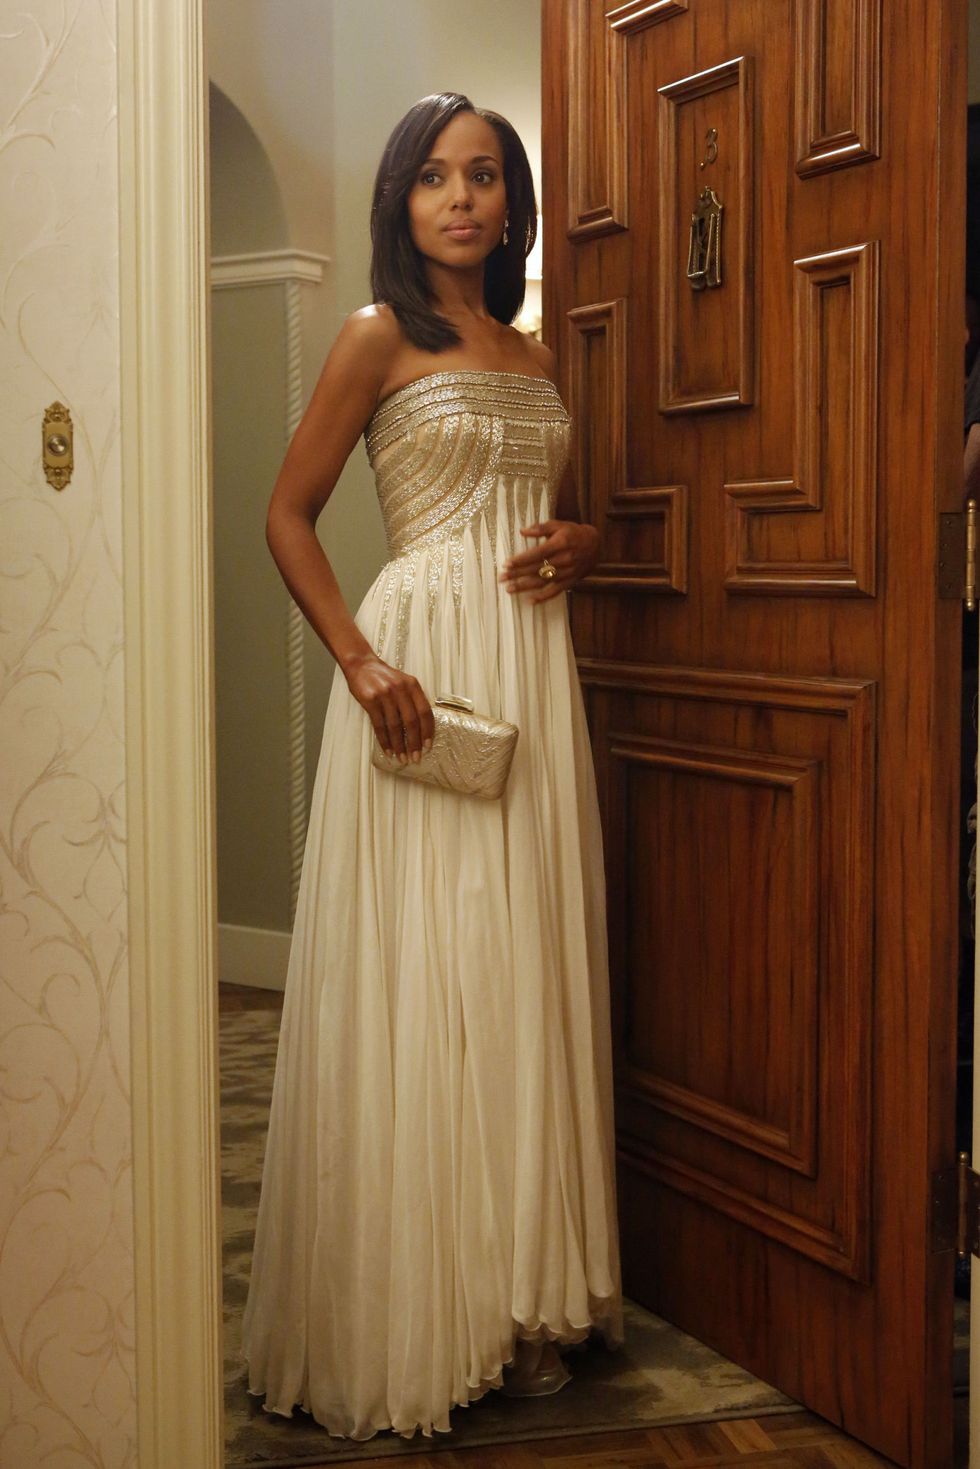 Scandal's Olivia Pope has a wardrobe full of princess-worthy gowns